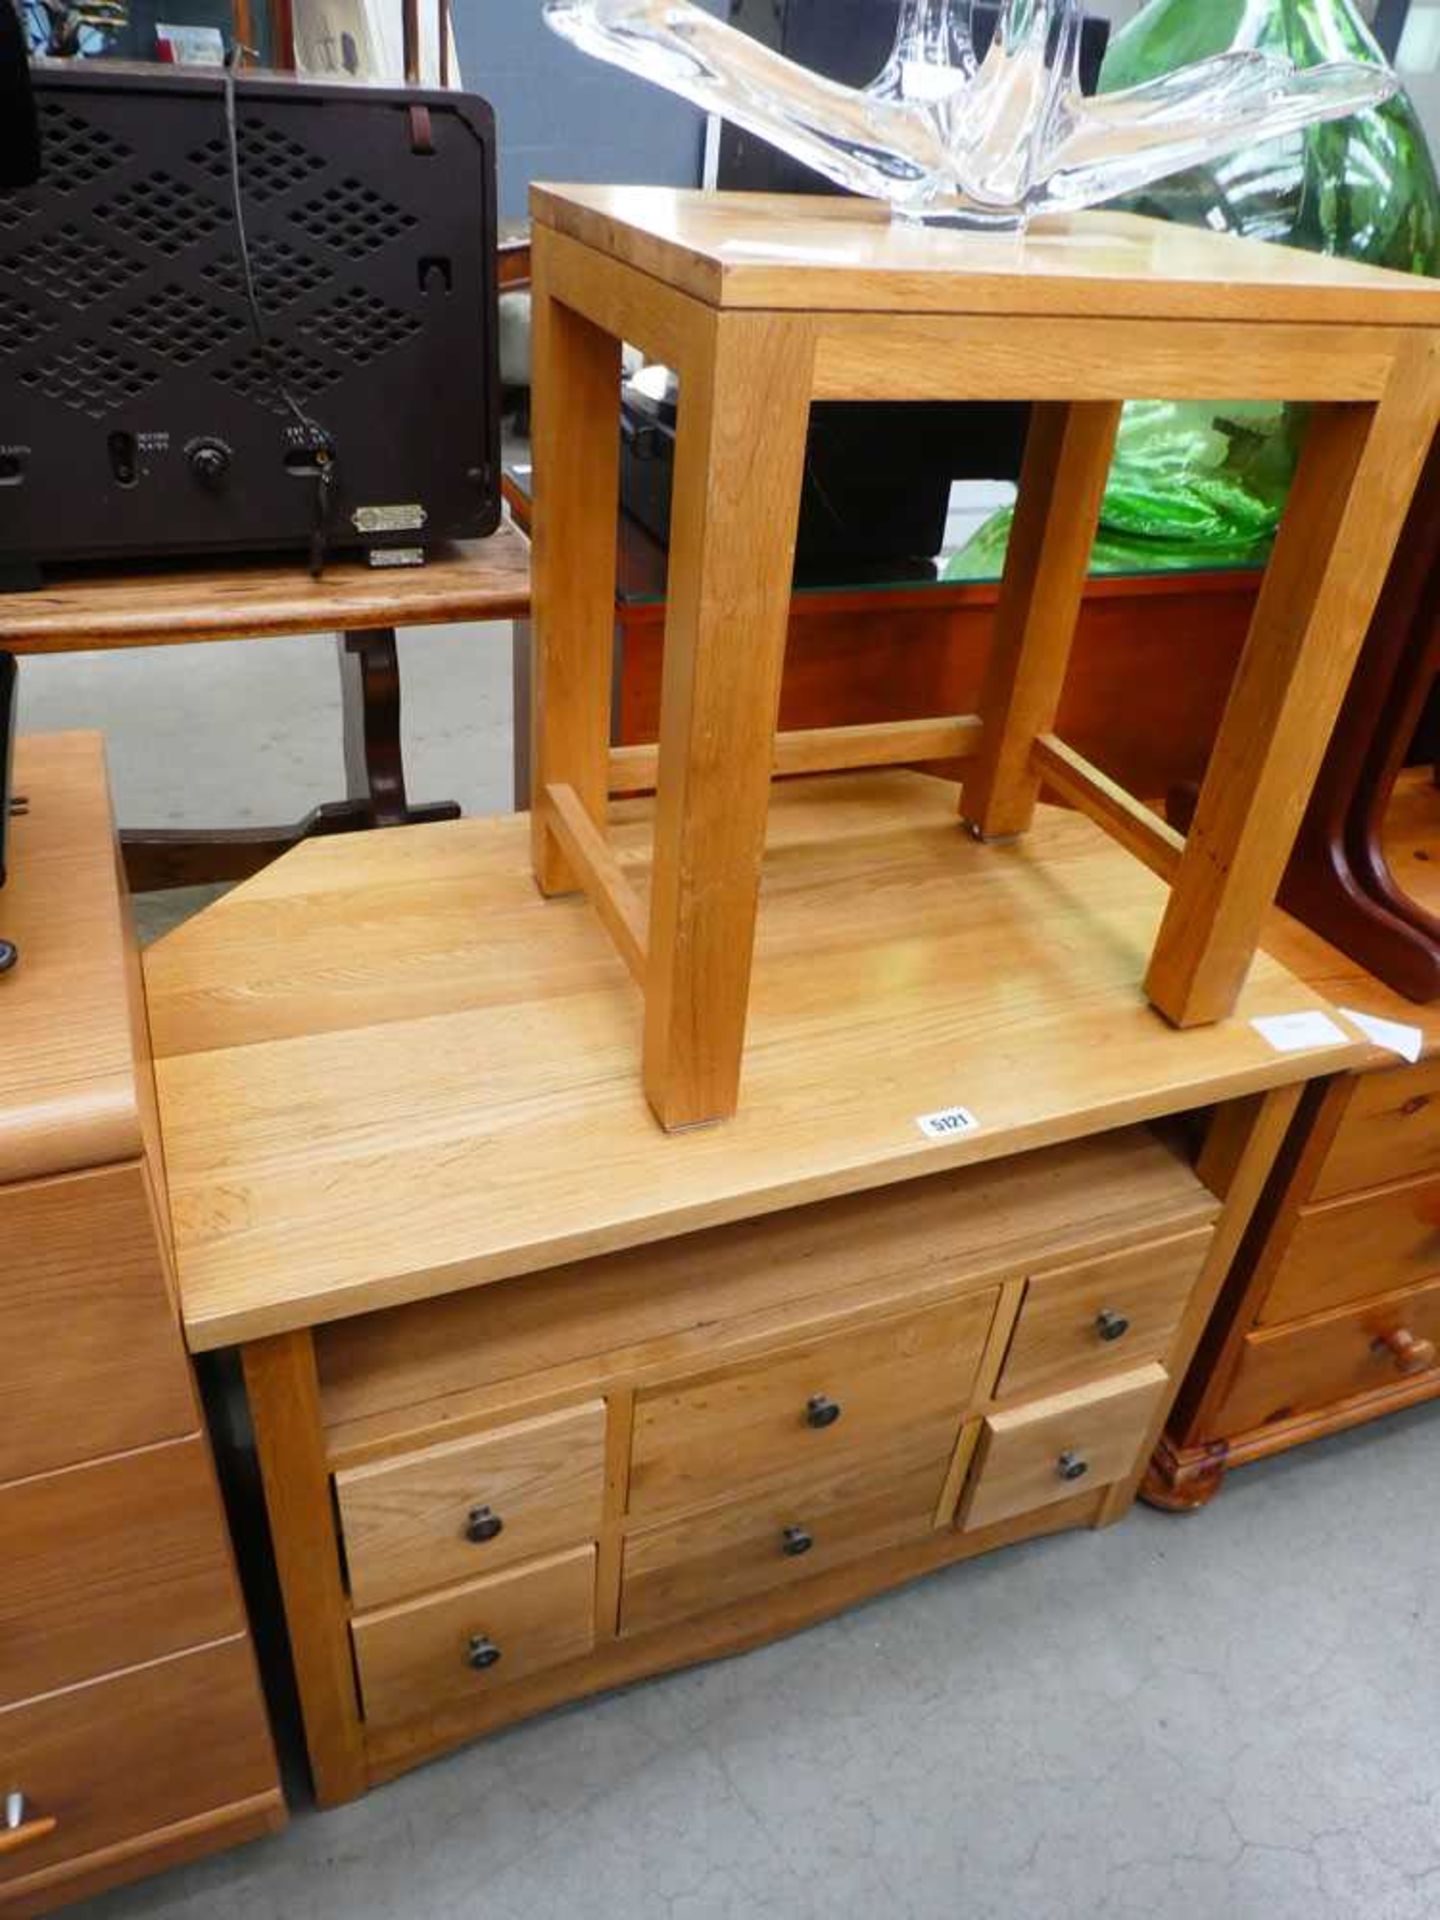 Oak TV stand with shelf and drawers under plus a side table